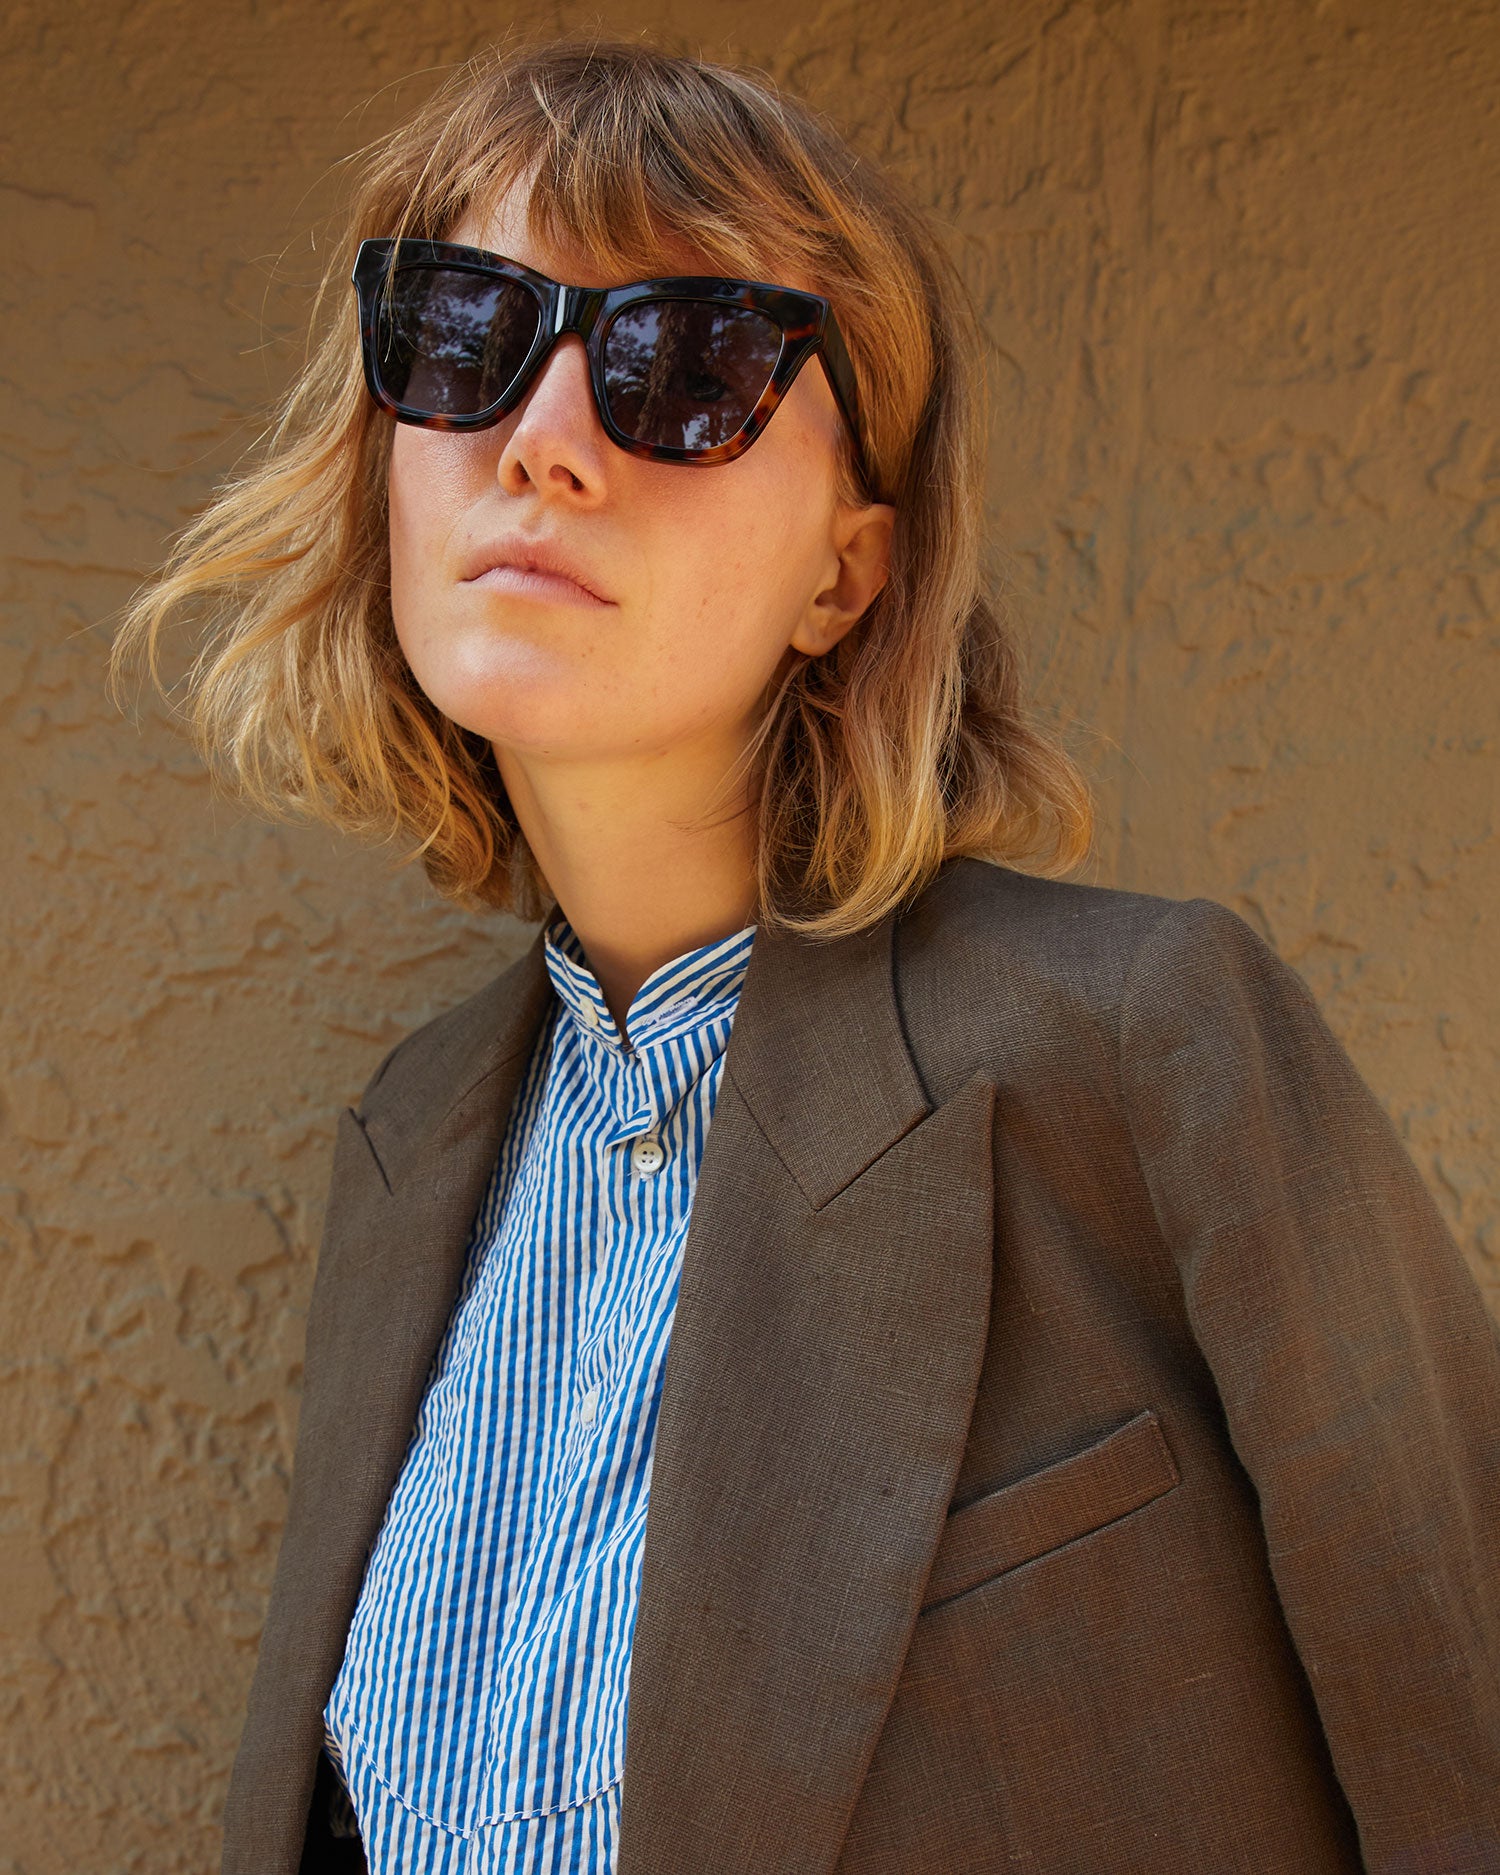 Lou wearing the Steven Alan Linen Blazer in Tobacco  with the CV Heather Sunglasses in Tortoise